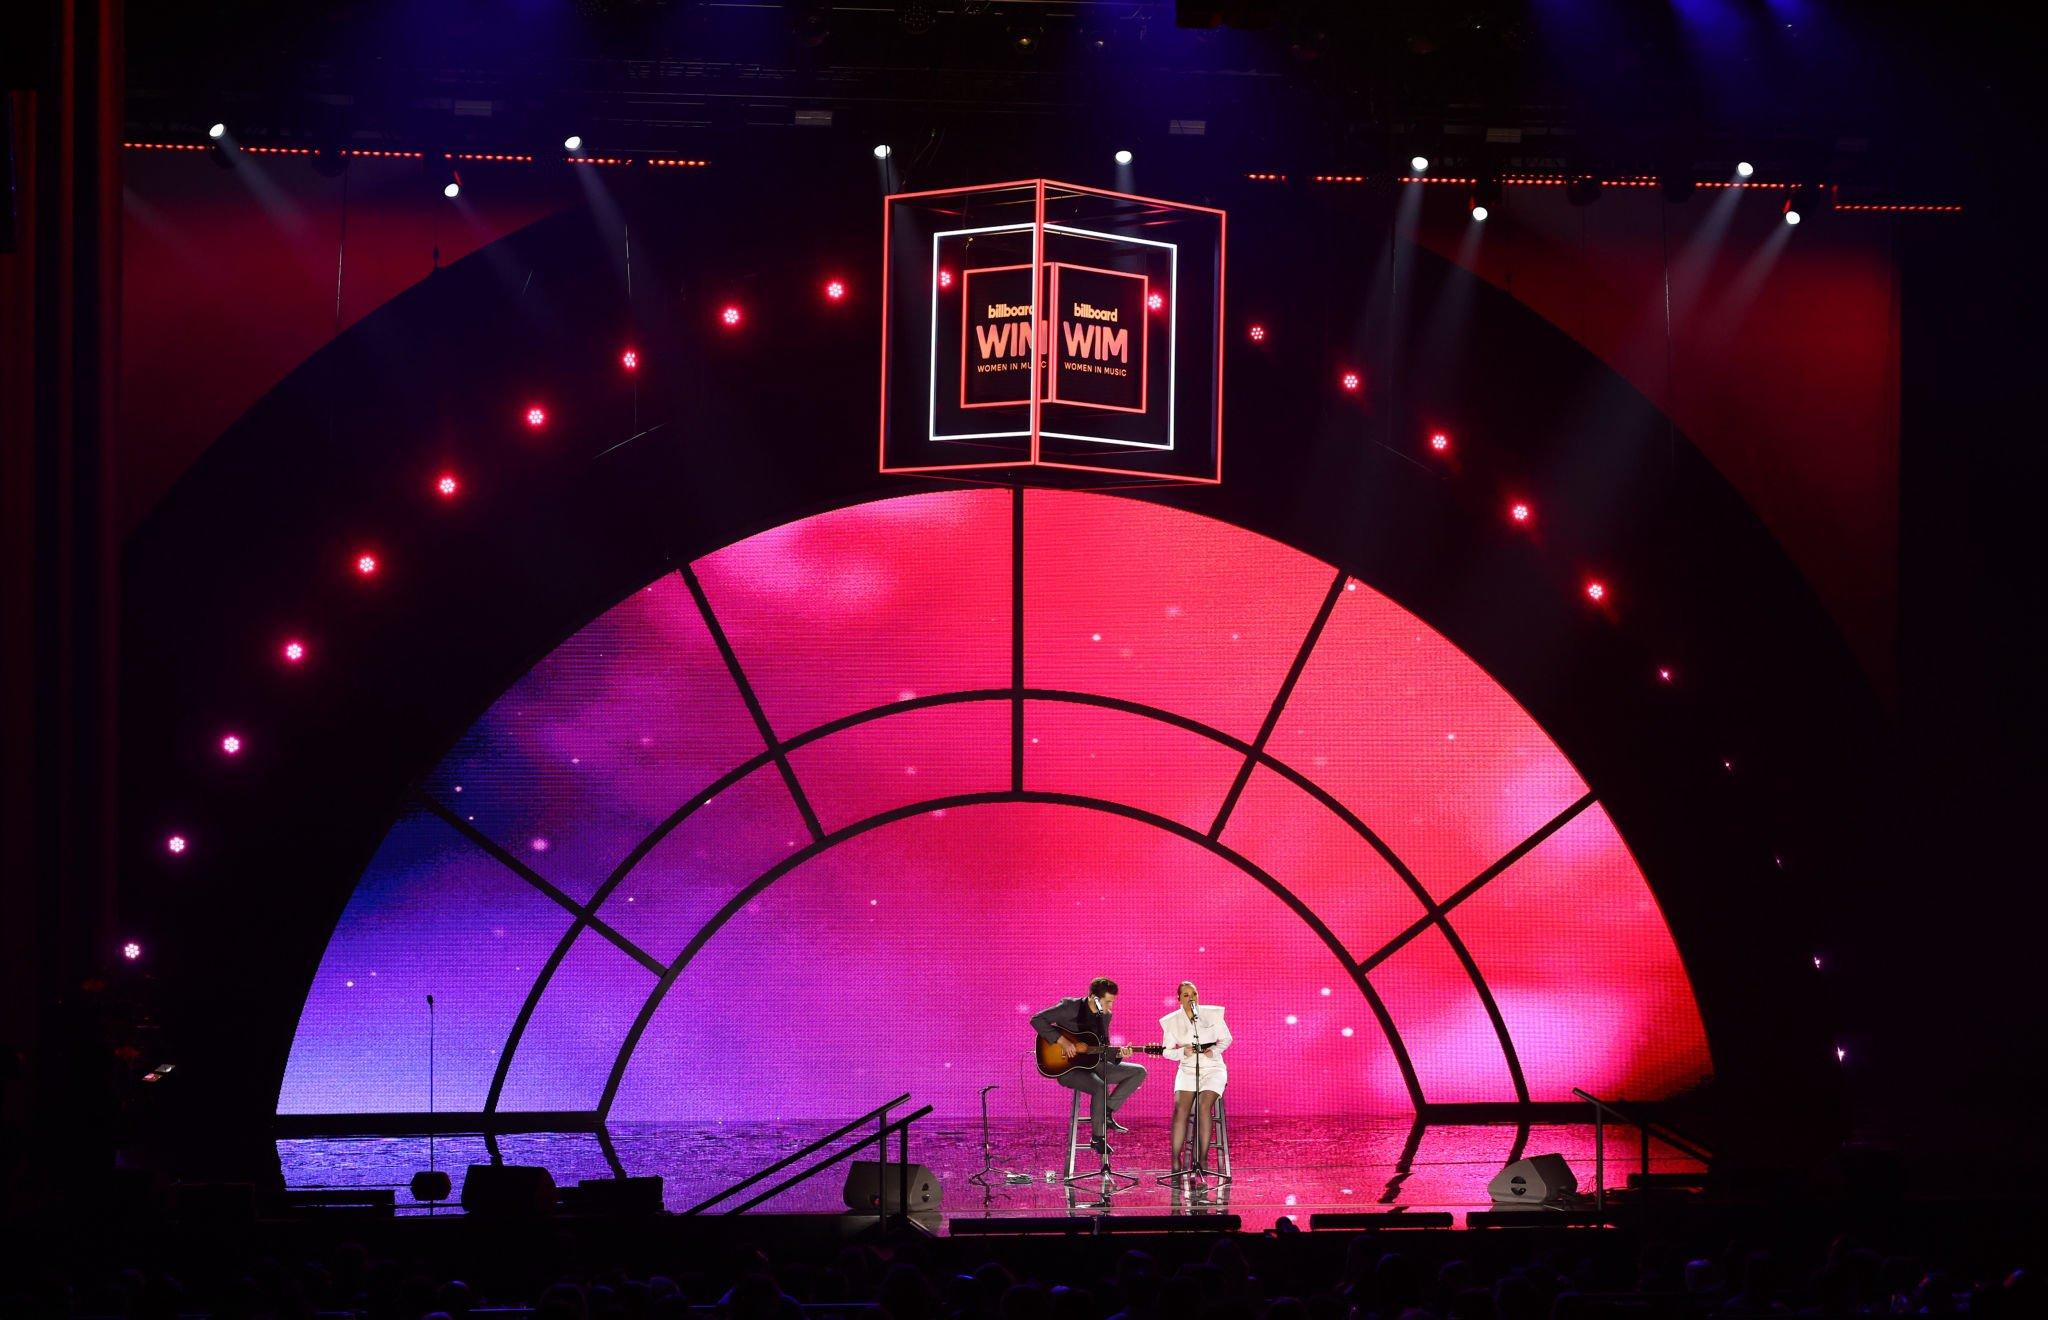 Gabby Barrett performs "I Hope" with husband Cade Foehner at the 2022 Billboard Women in Music Awards
